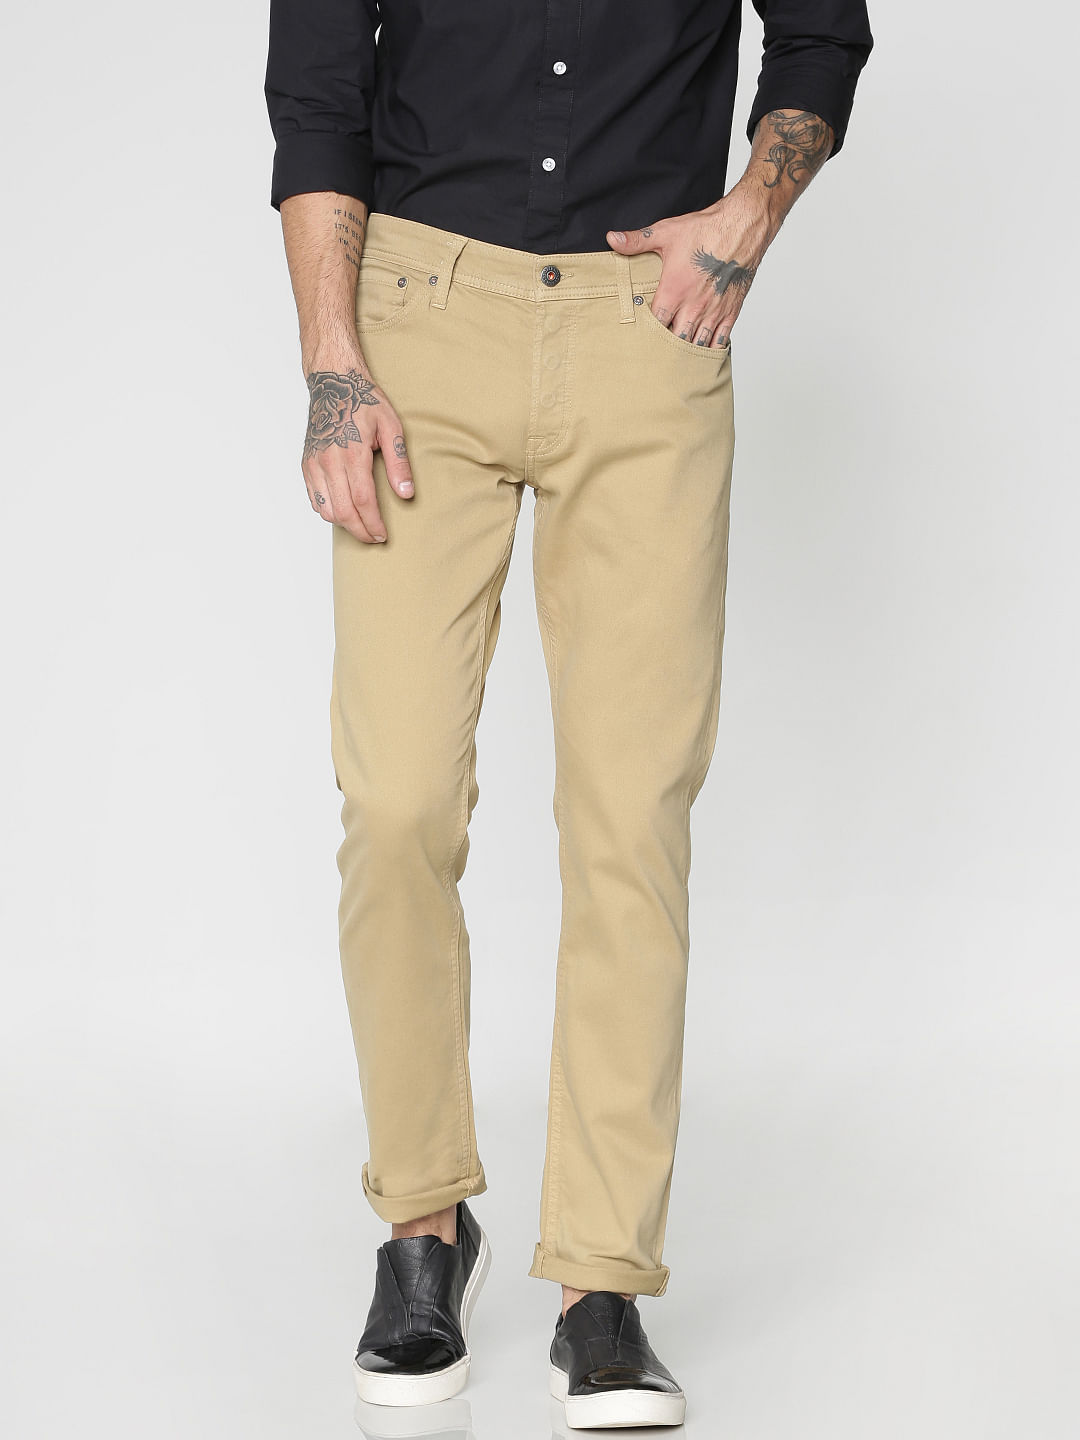 Bleed Zero Jeans In Brown Yonk Fit Abto